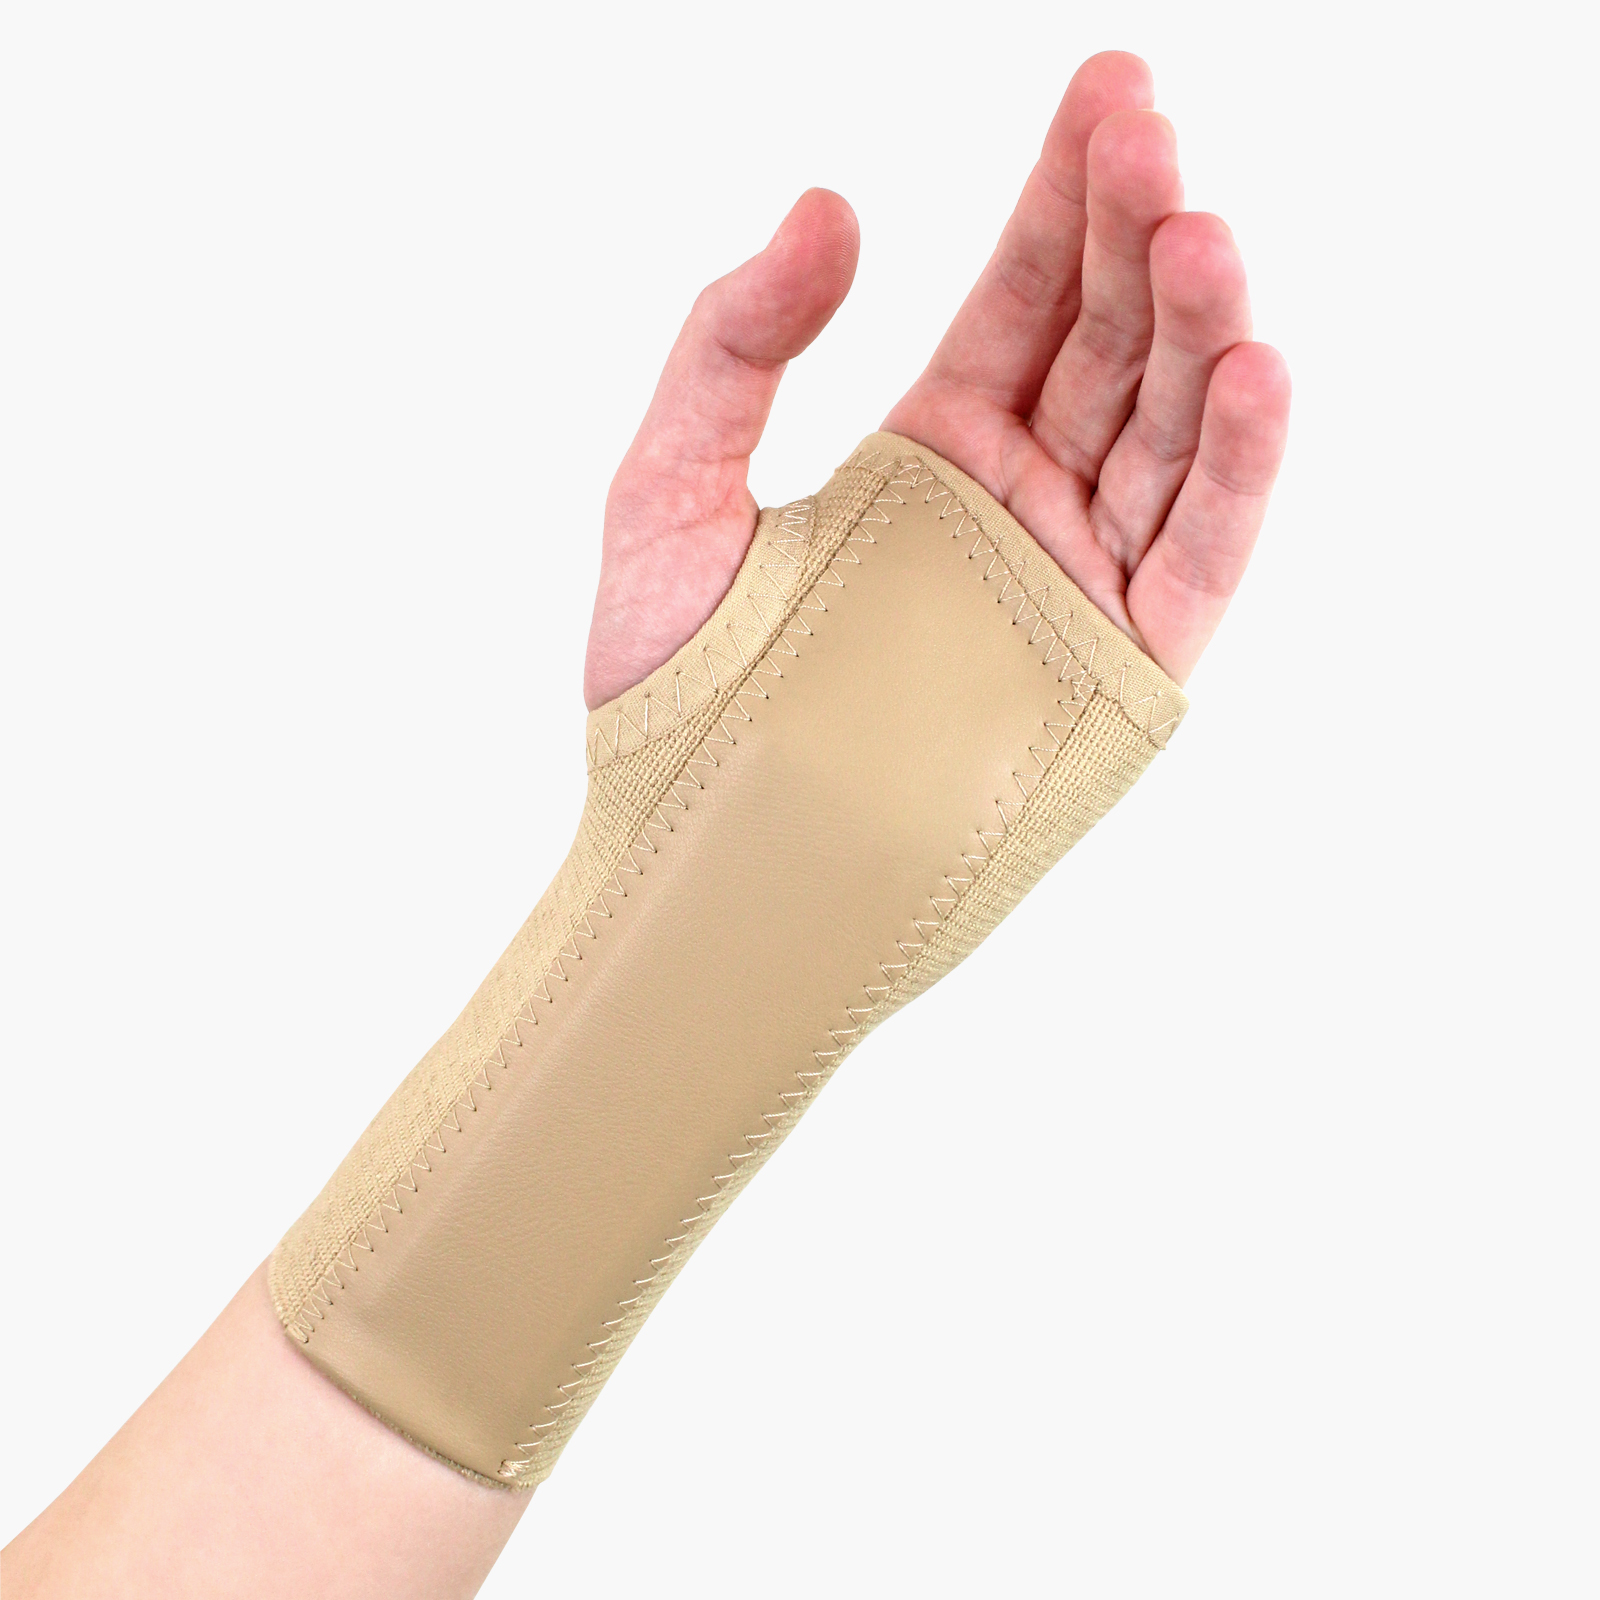 Wrist Braces & Supports, By Body Part, Open Catalog